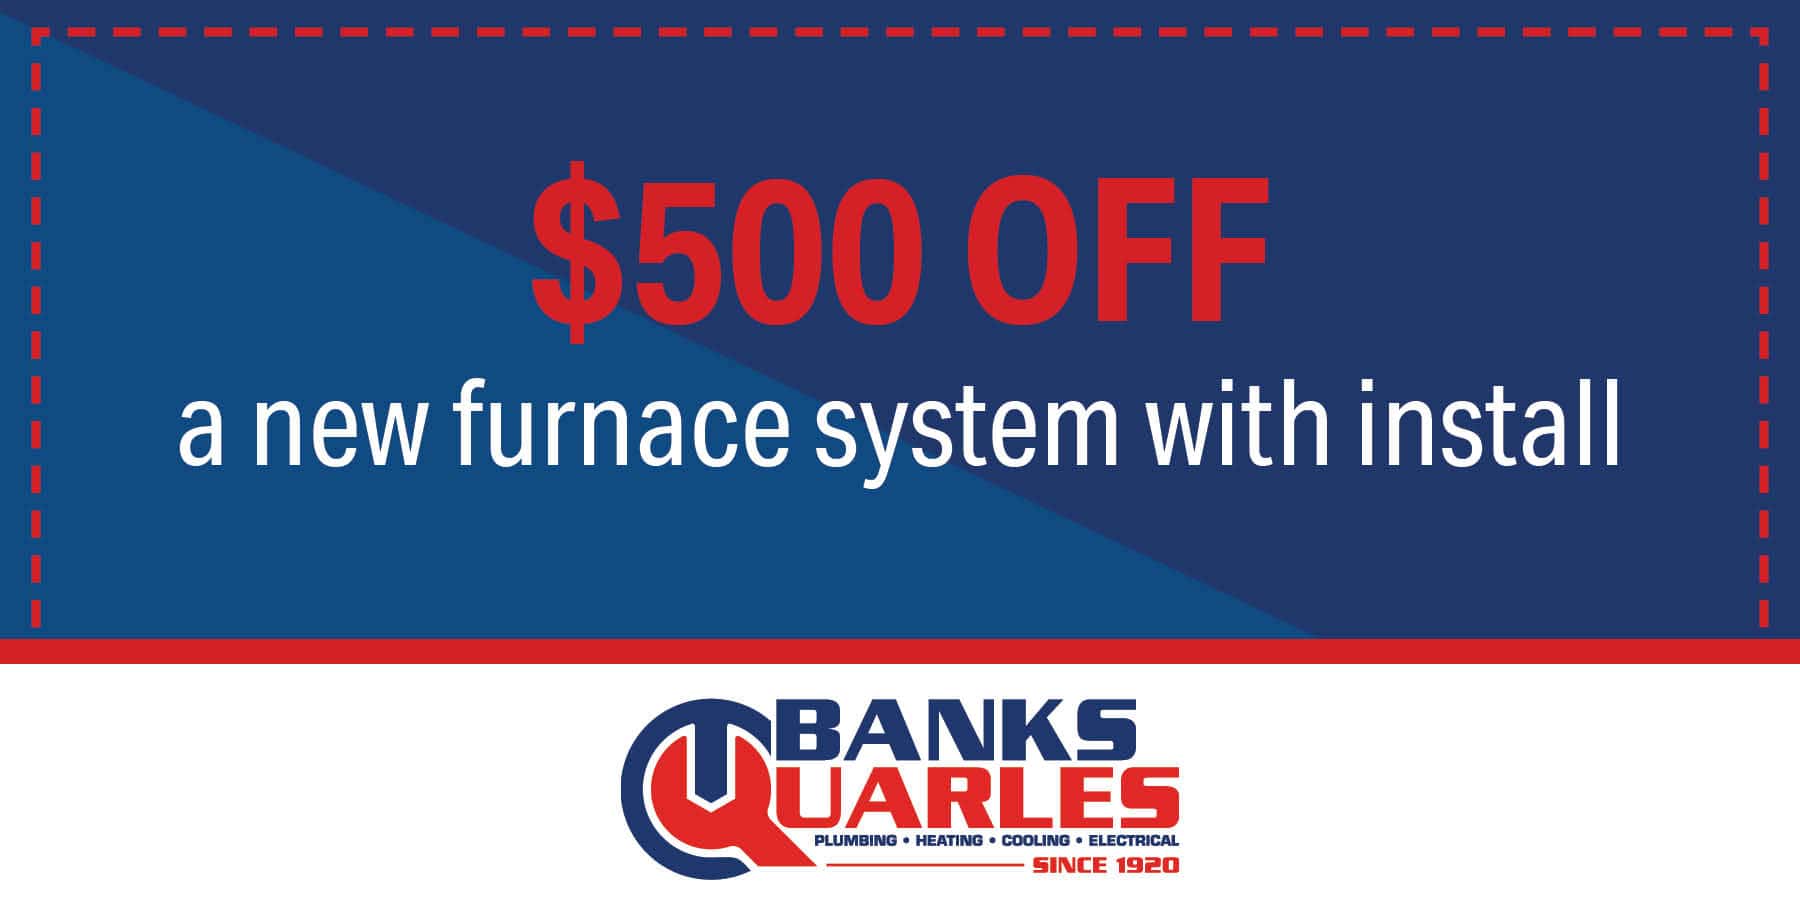 0 off a new furnace system with install. Offer subject to expire without warning. Contact us for details.